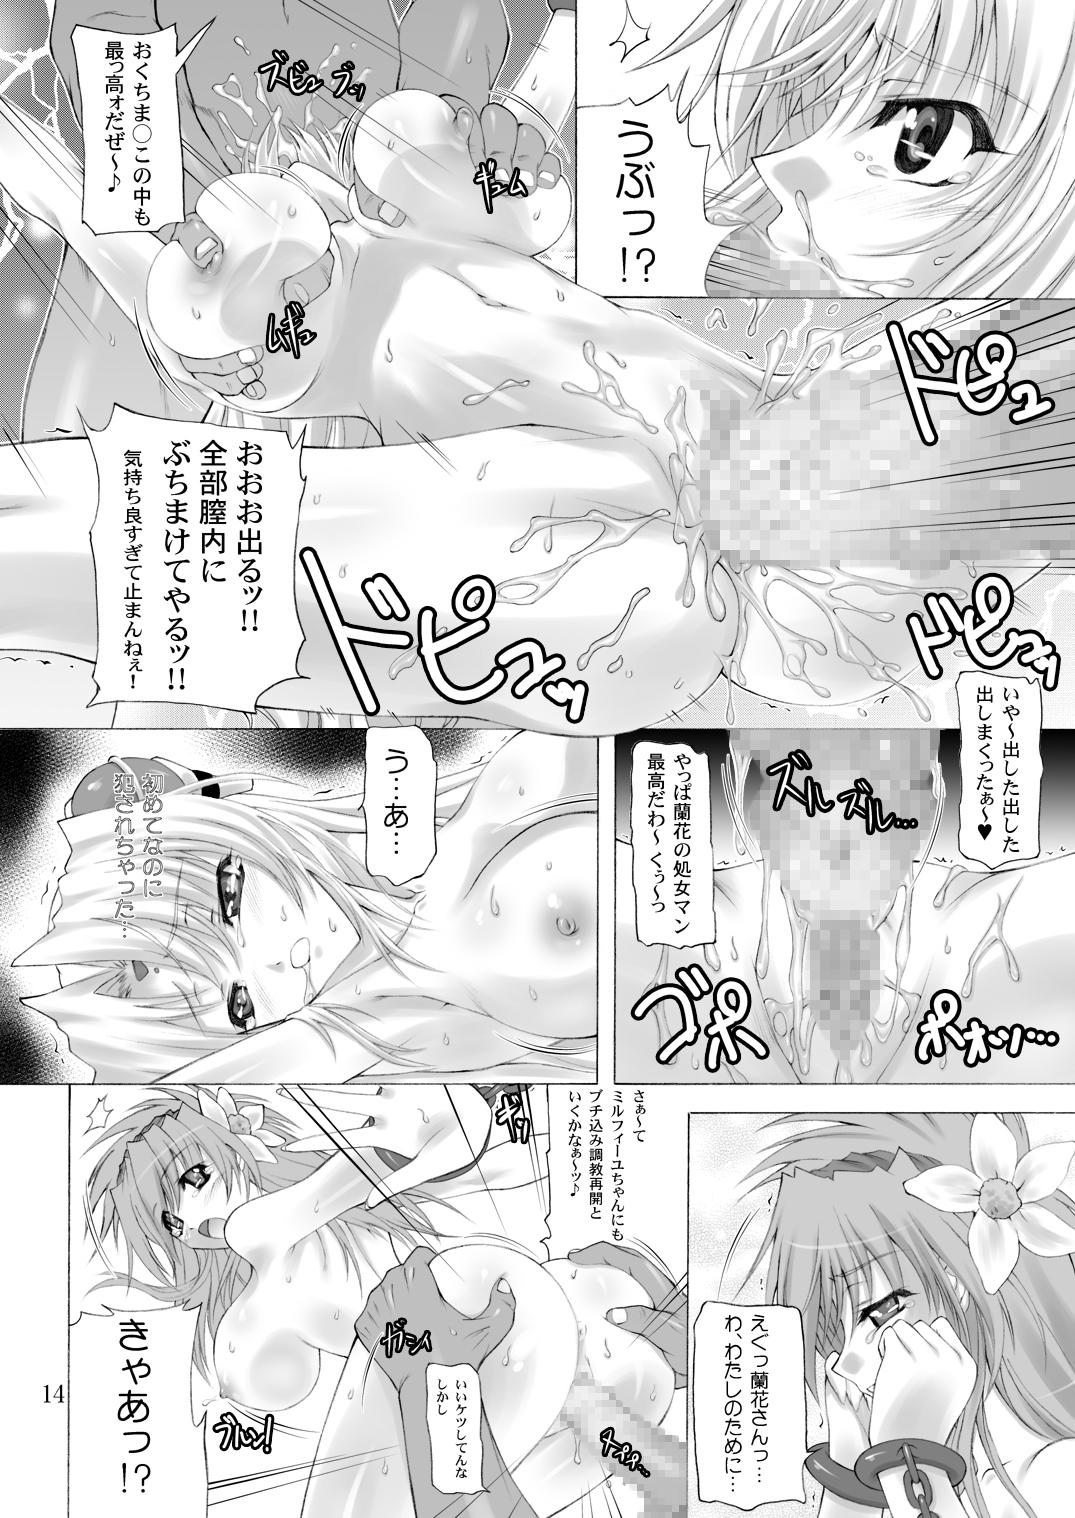 Best Blowjobs Super Rinpha Time! - Galaxy angel Fuck Her Hard - Page 13